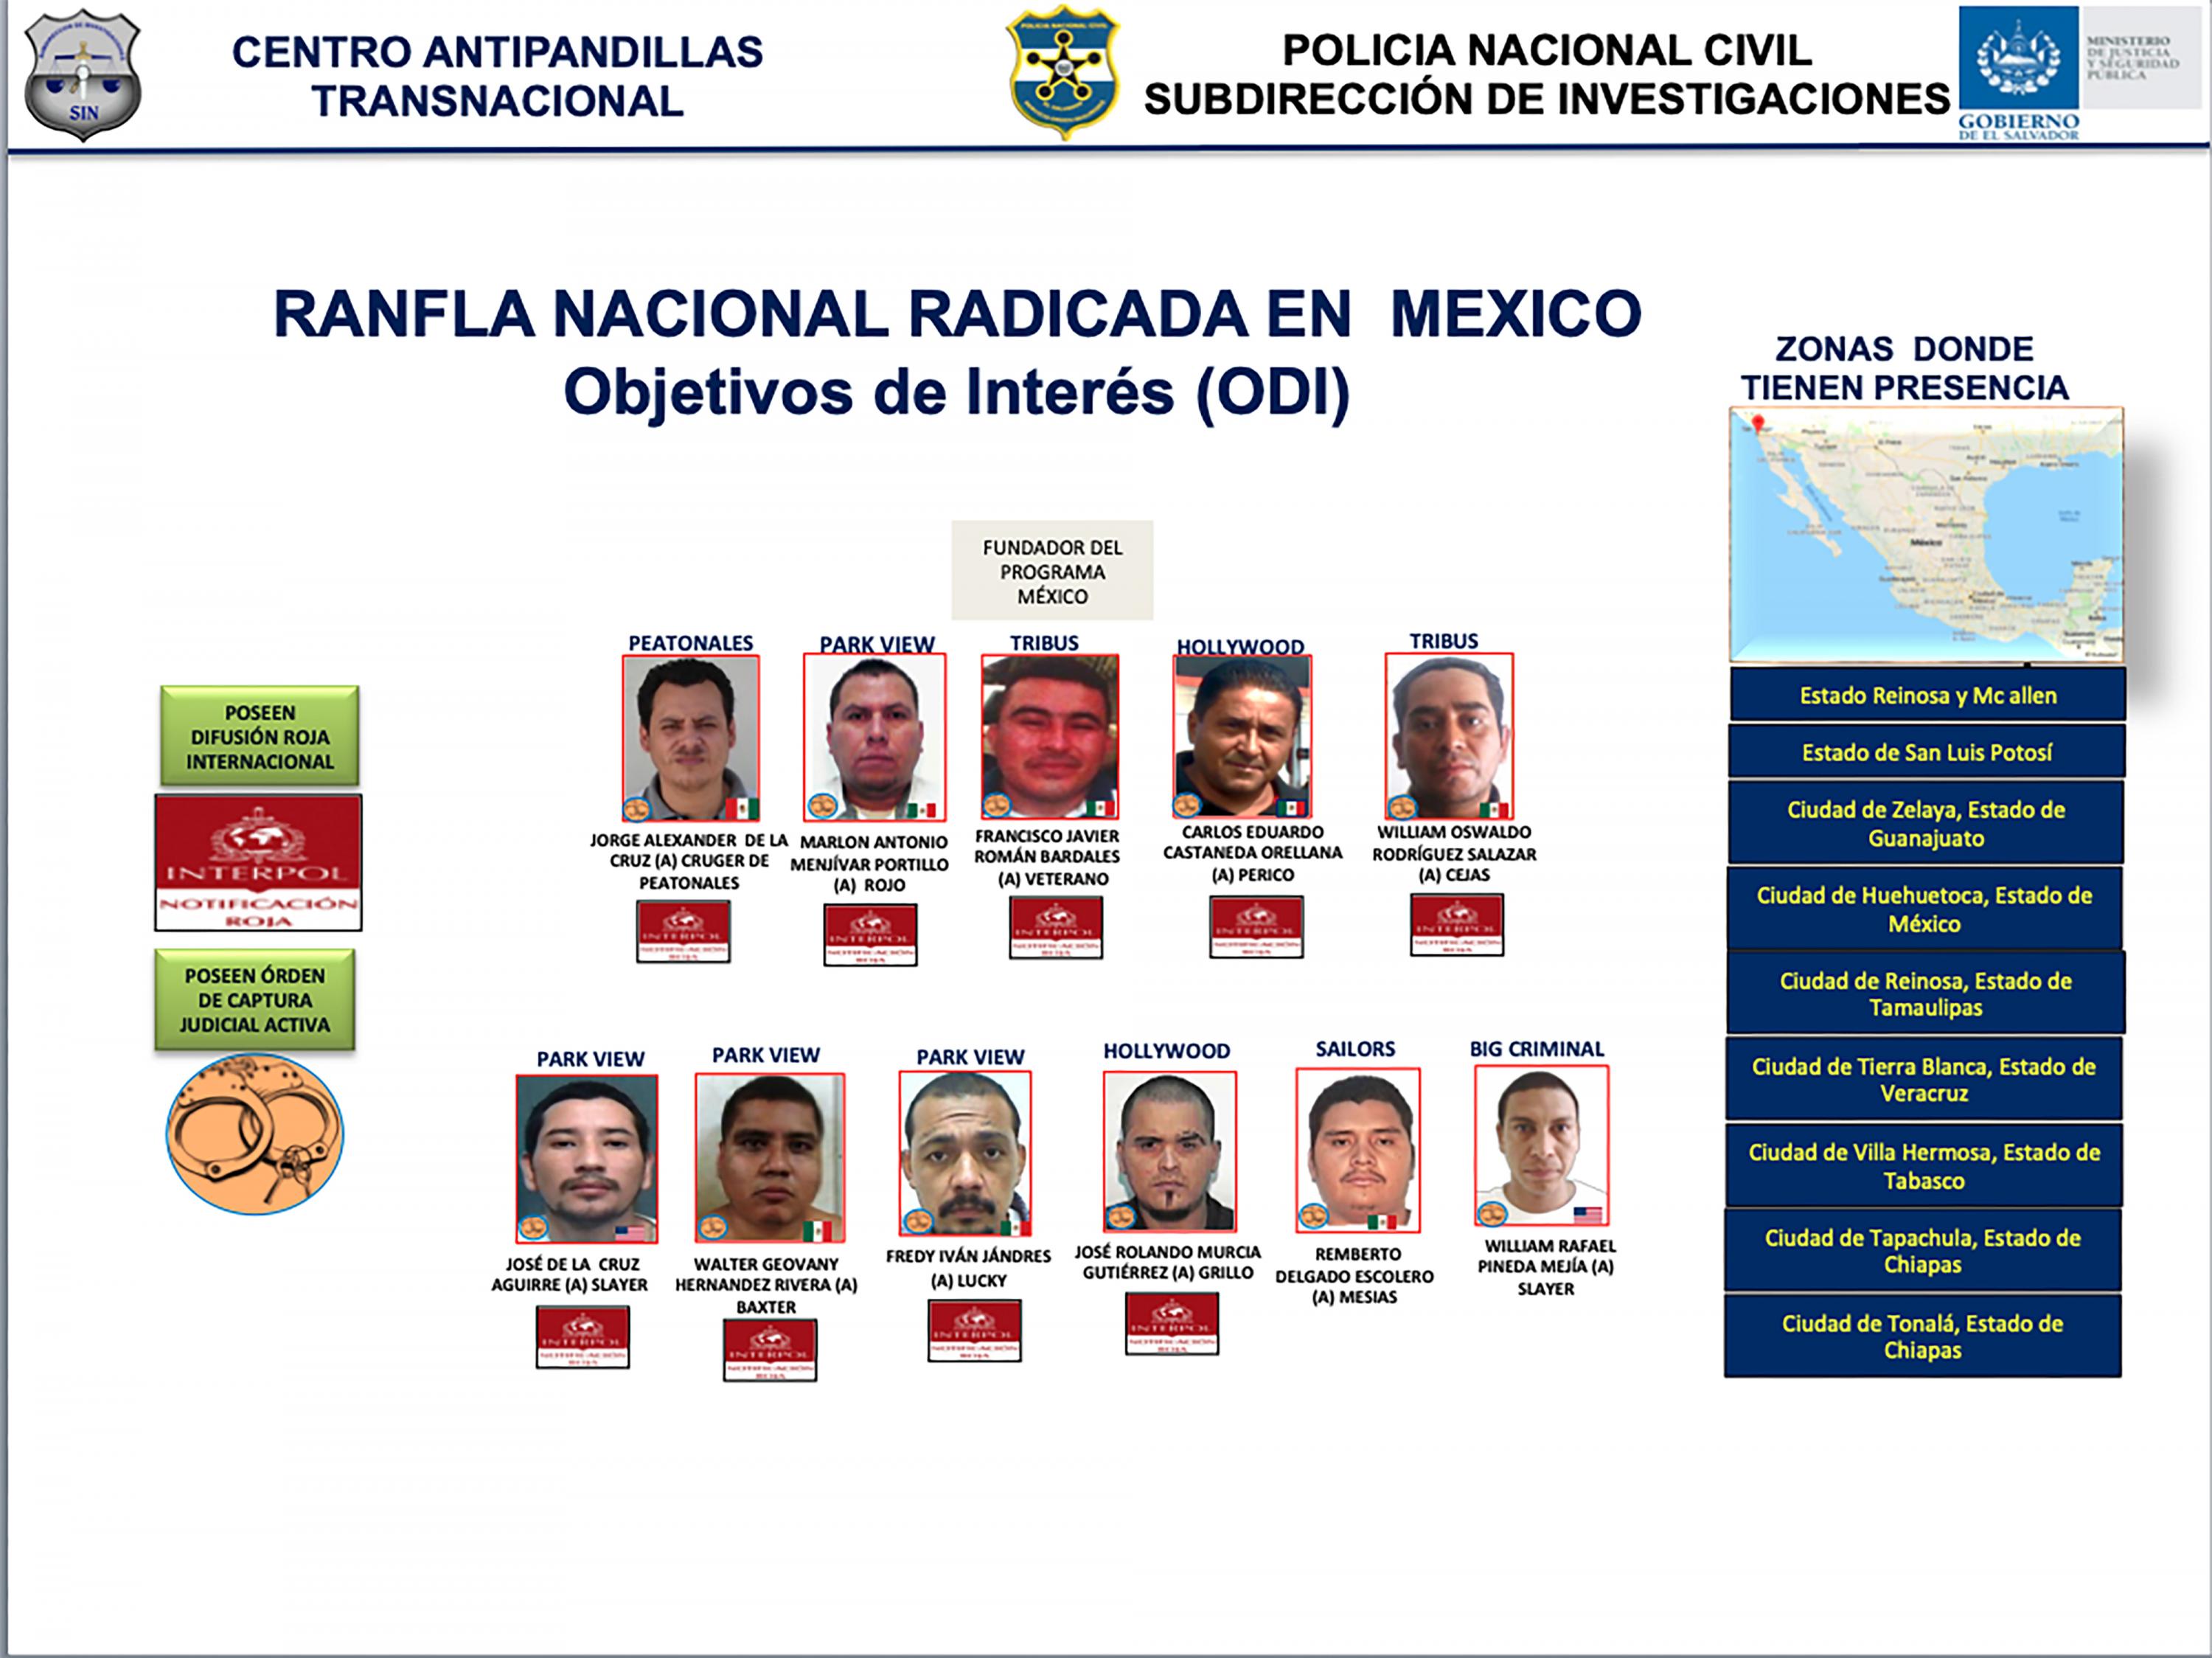 Document from the El Salvador-based Transnational Anti-Gang Center profiling MS-13 ranfleros based in Mexico.